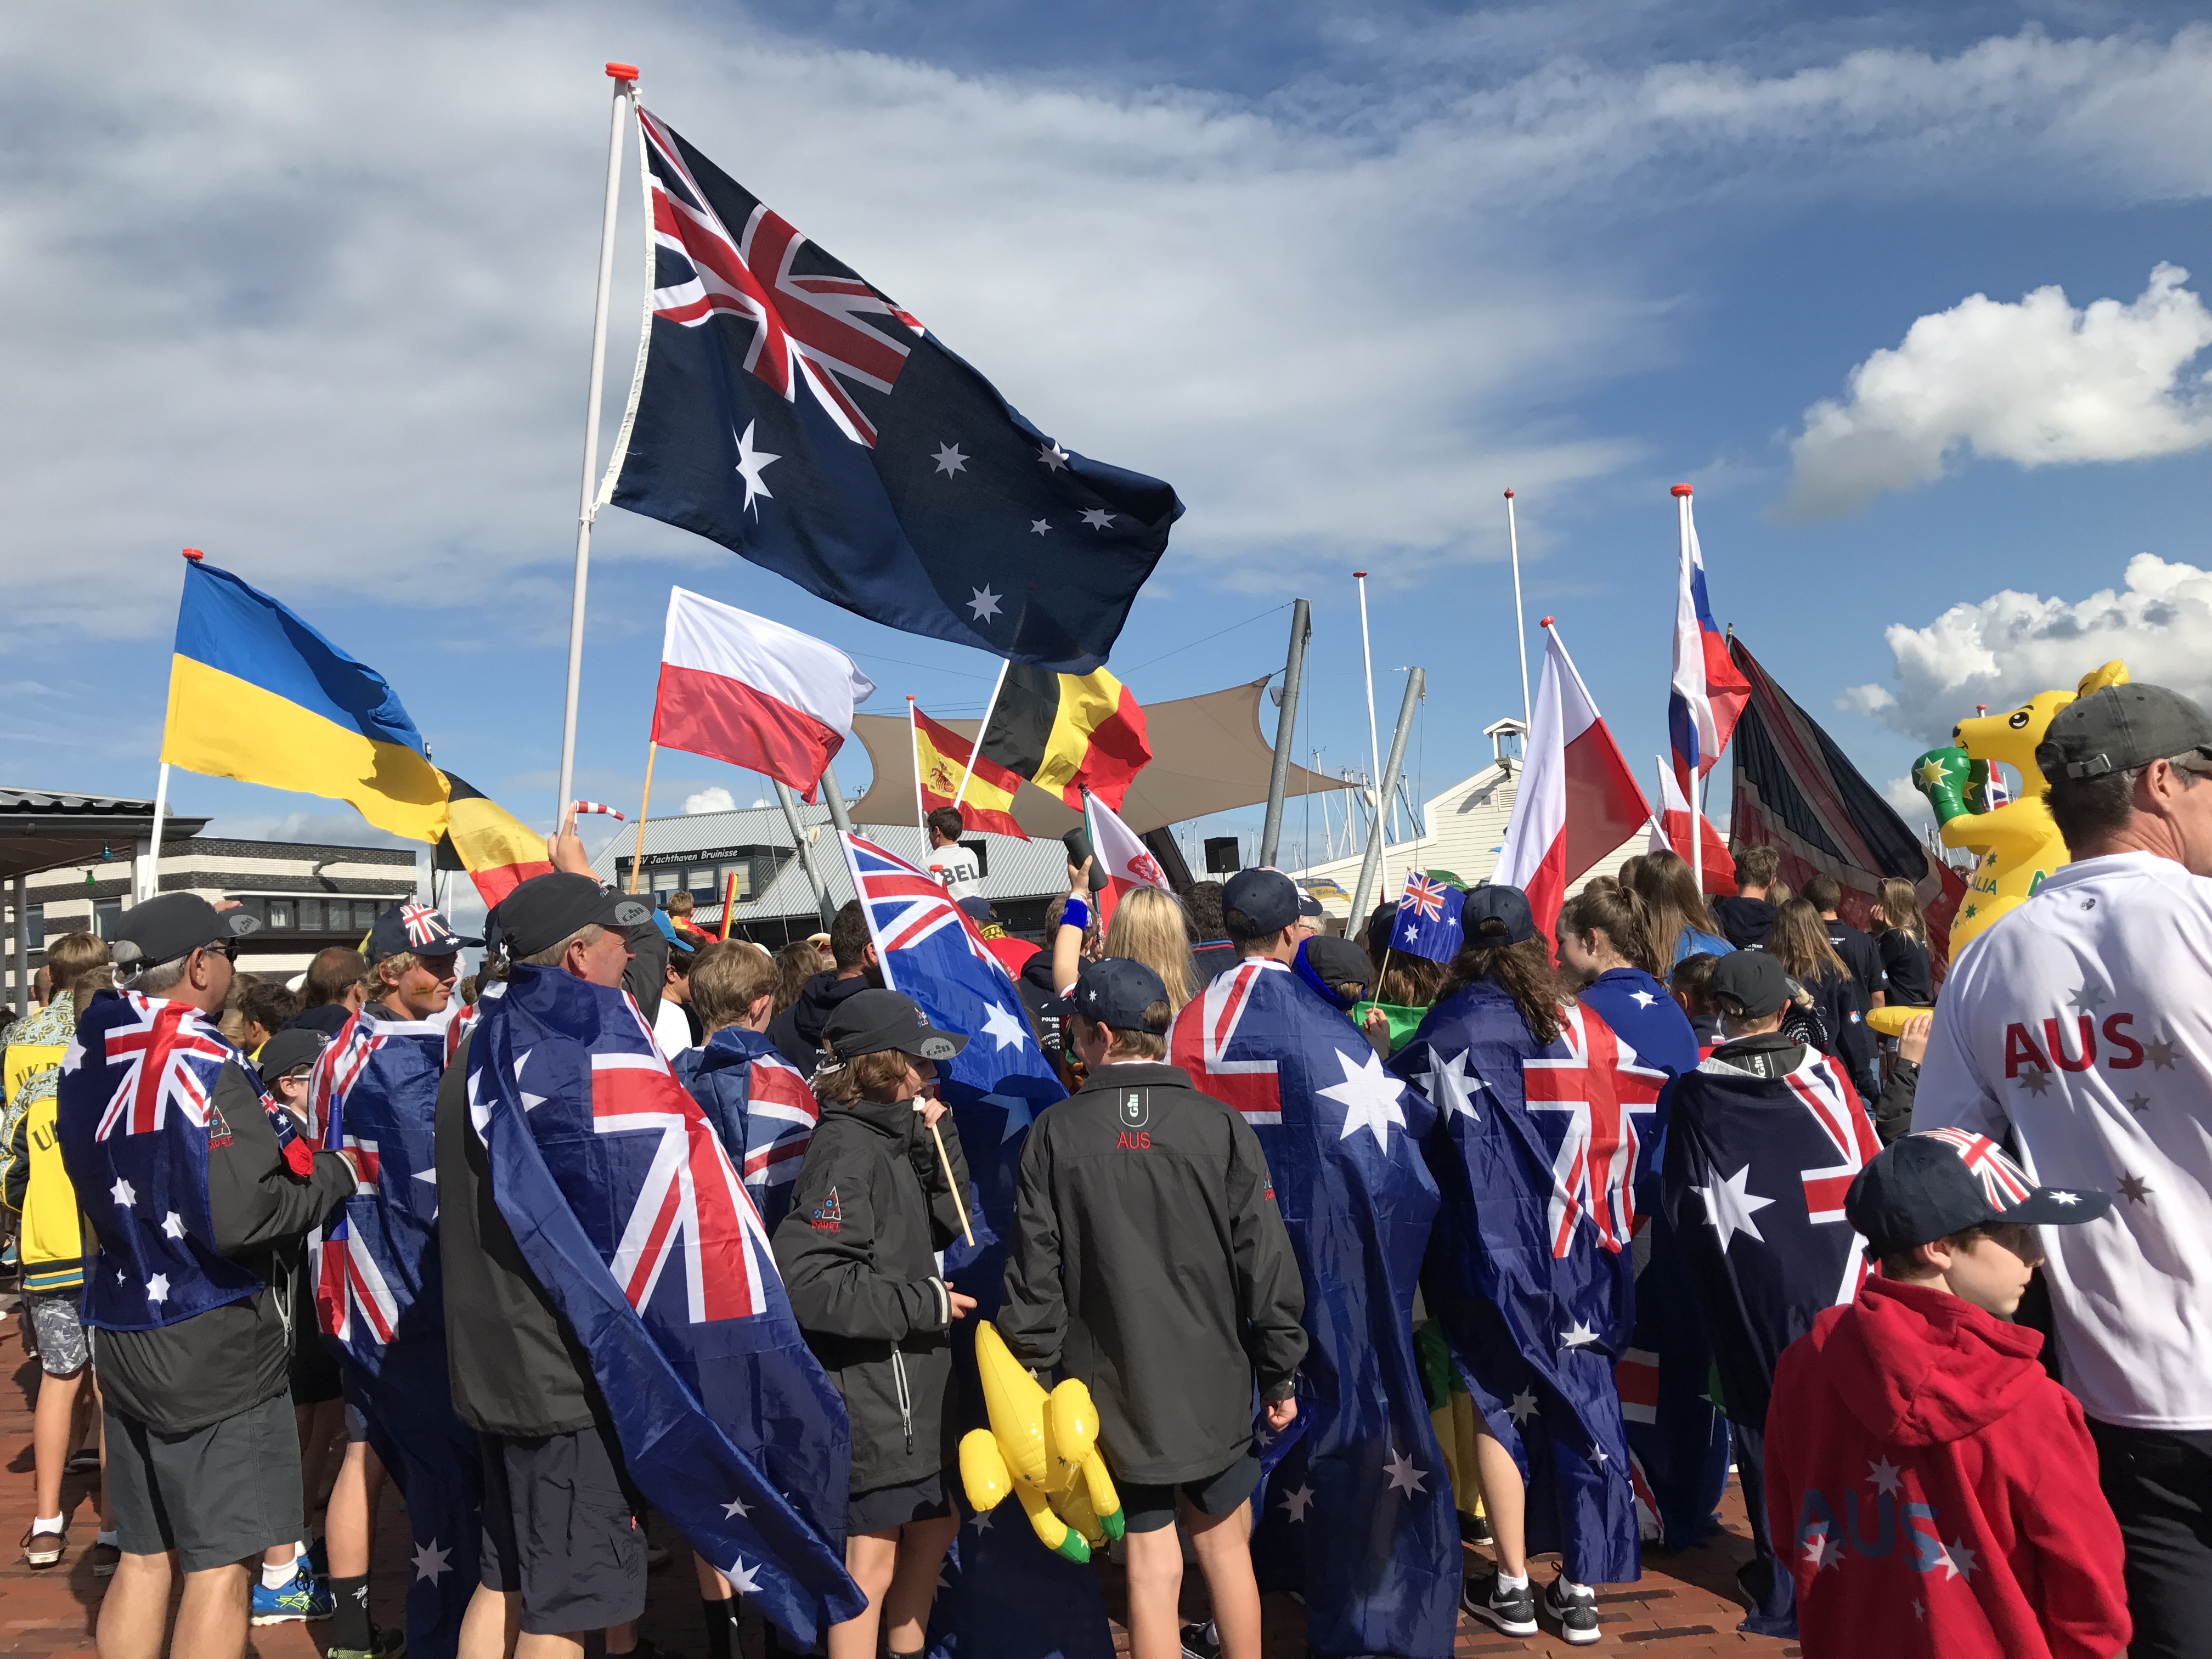 Cadet Worlds | Bully’s Blog #4 – Aussies win practice race